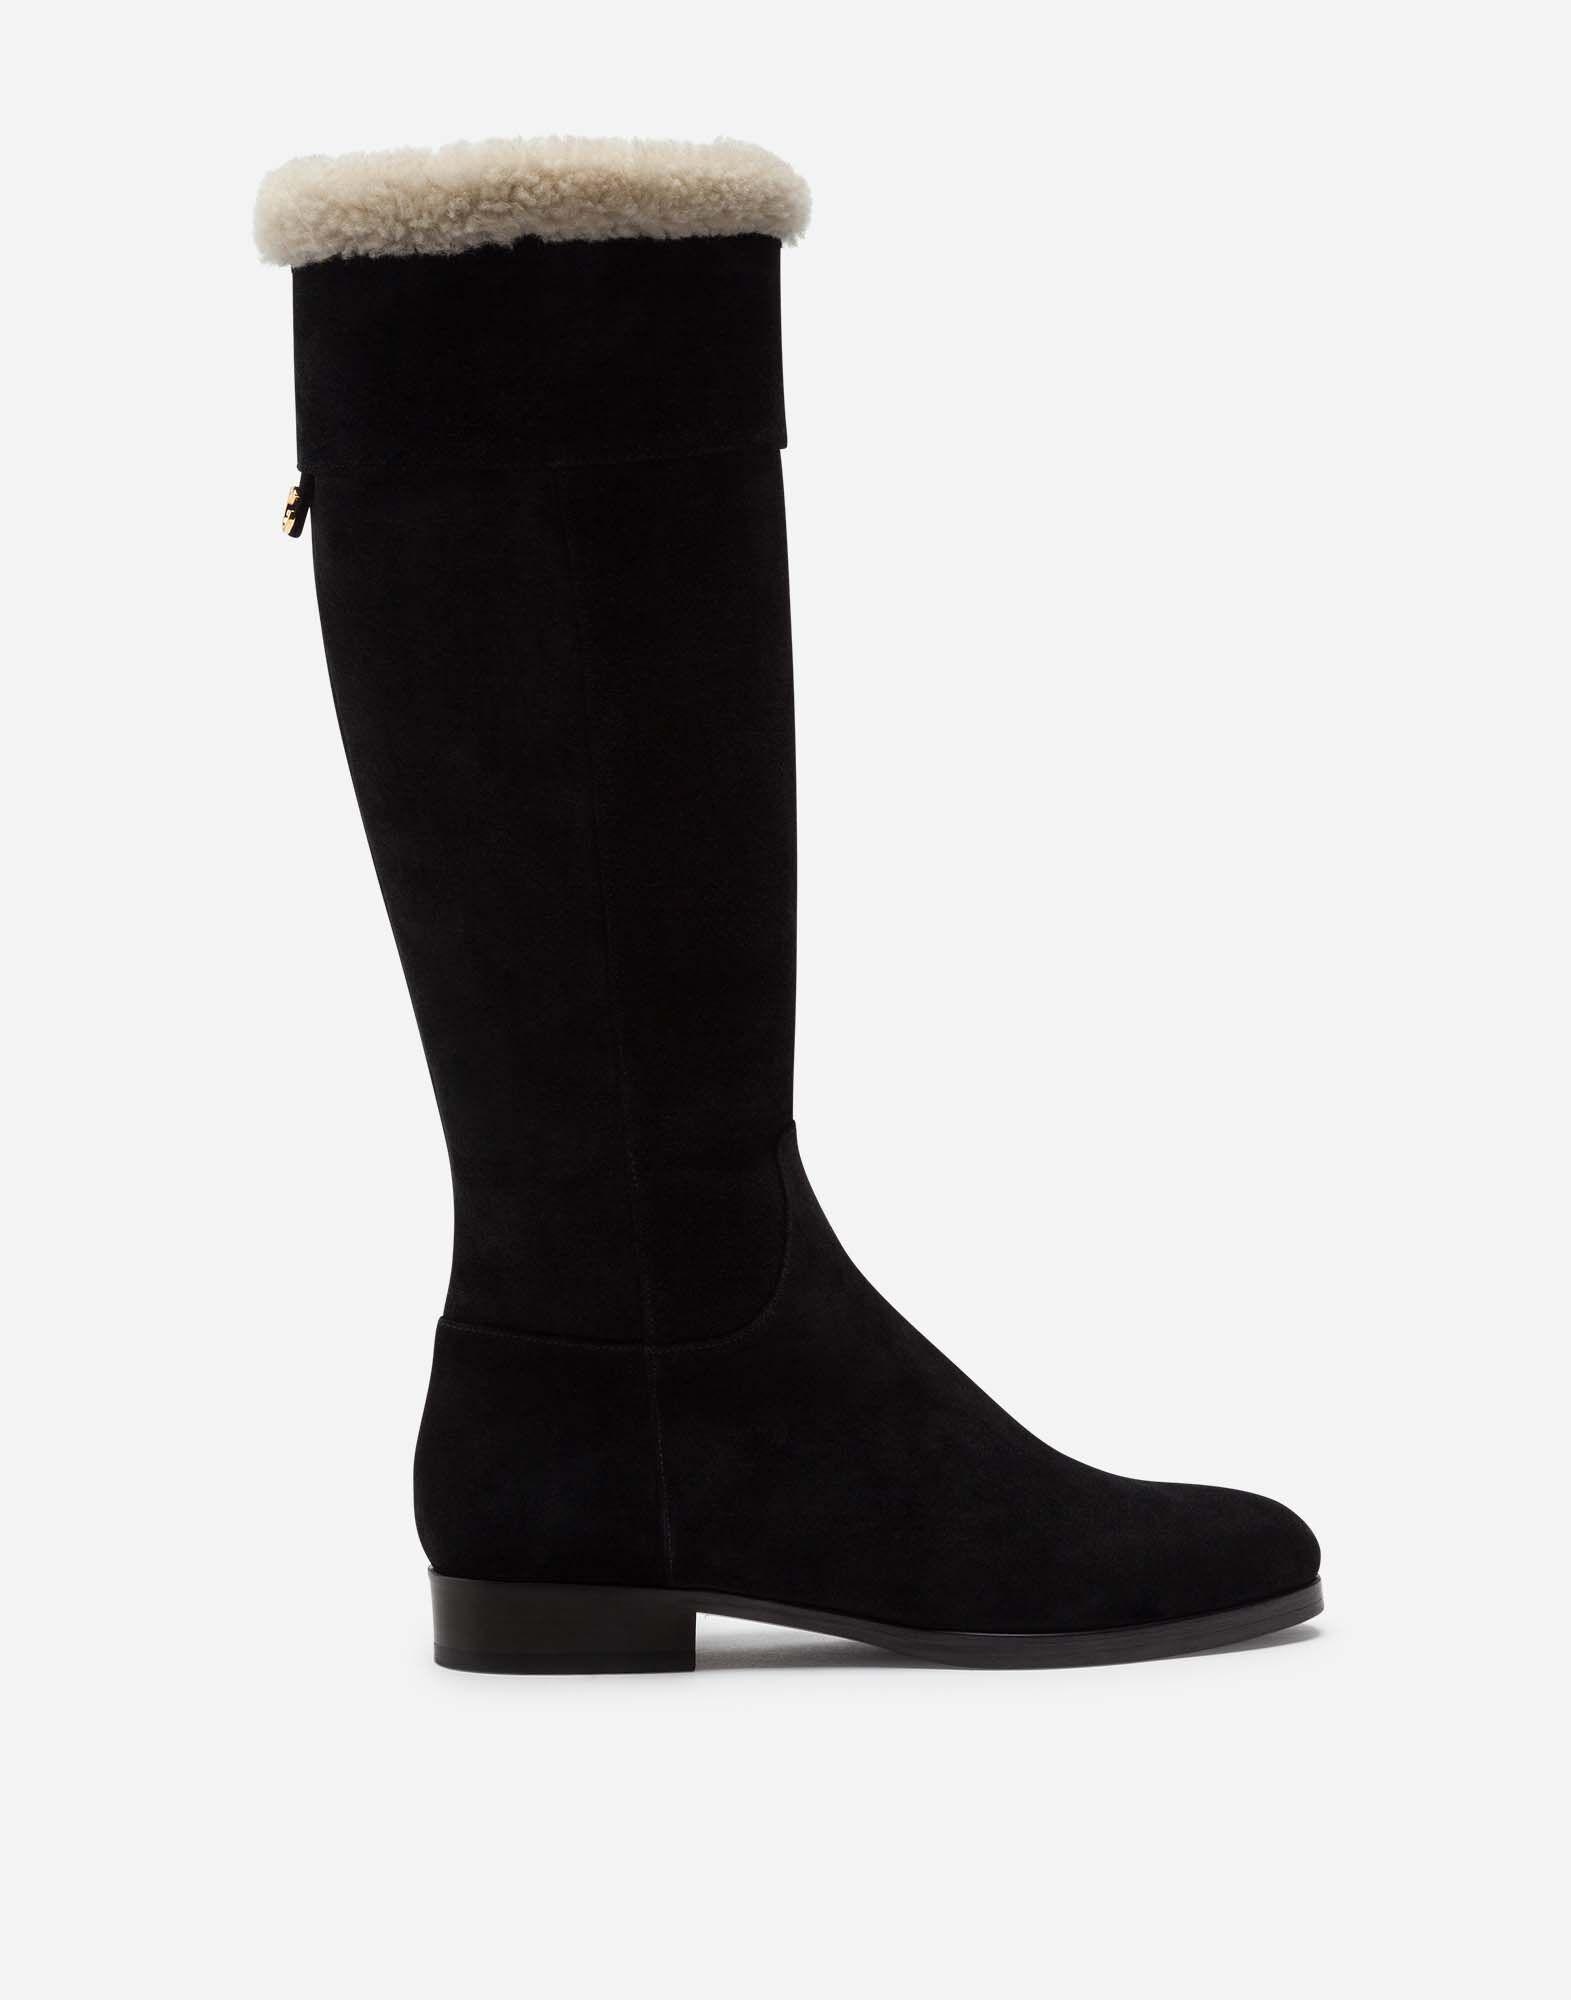 Dolce & Gabbana Split-grain Leather Boots With Shearling in Black - Lyst